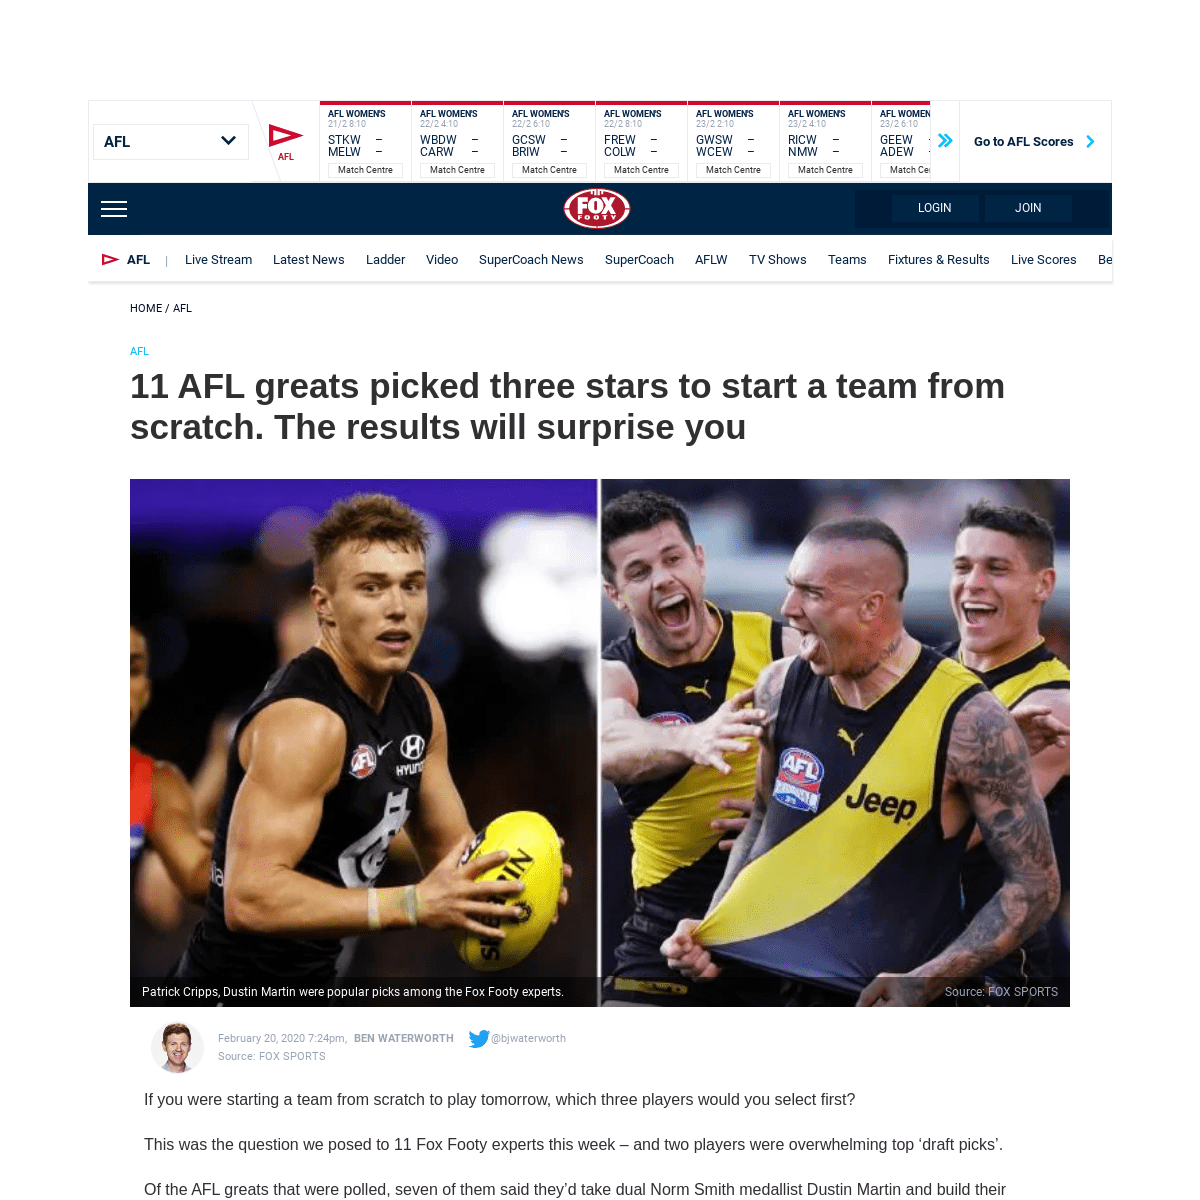 A complete backup of www.foxsports.com.au/afl/if-11-afl-greats-were-starting-a-team-from-scratch-theyd-pick-these-three-stars-fi